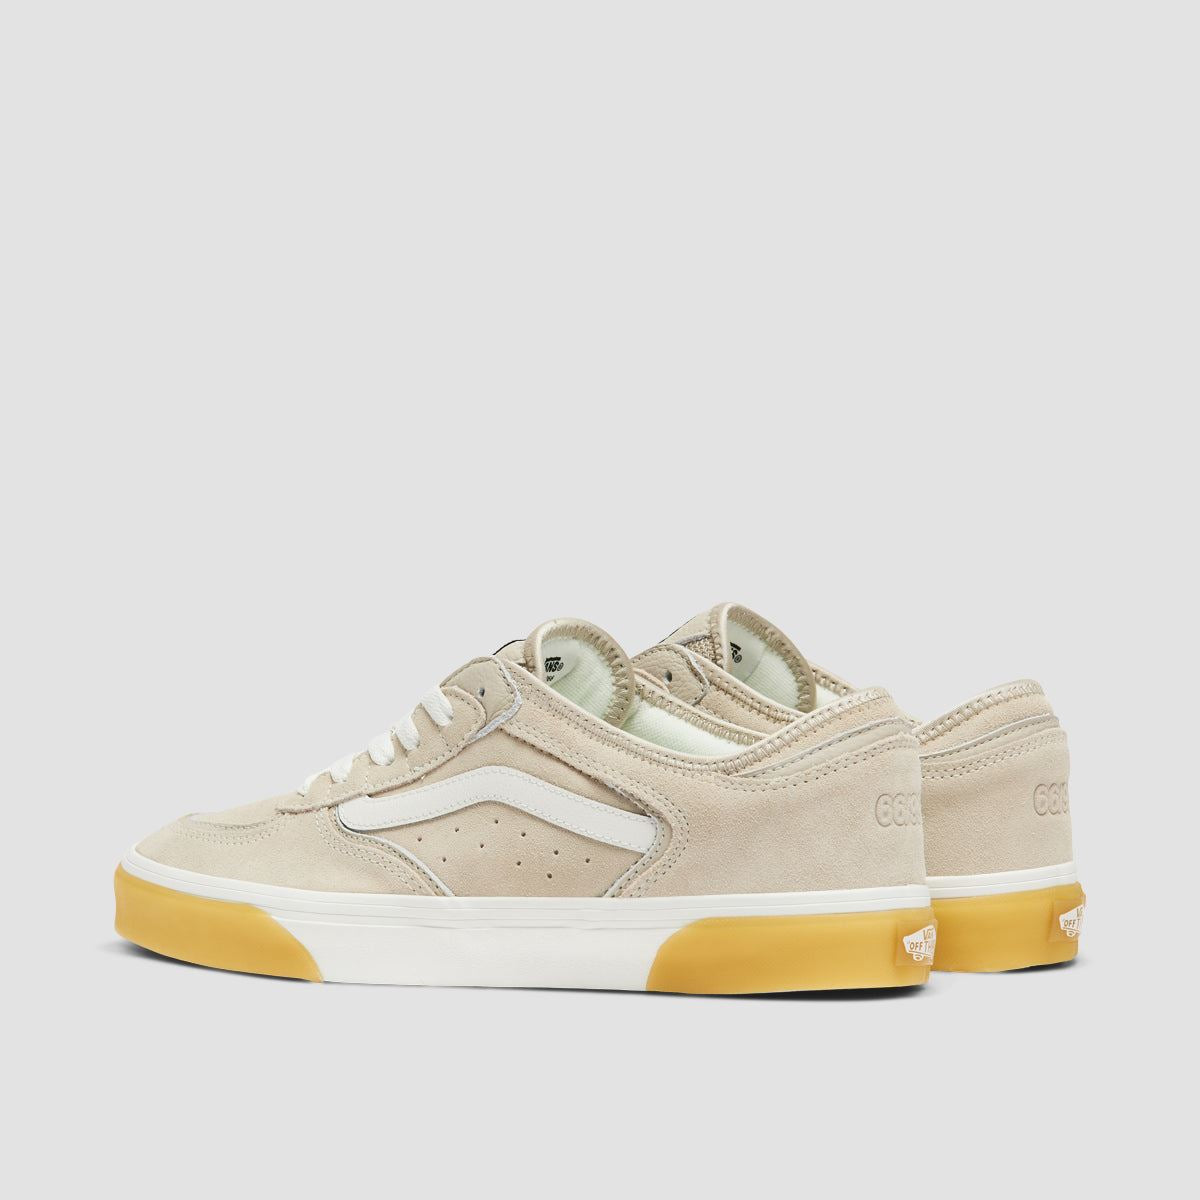 Vans Rowley Classic Shoes - Muted Clay/Gum